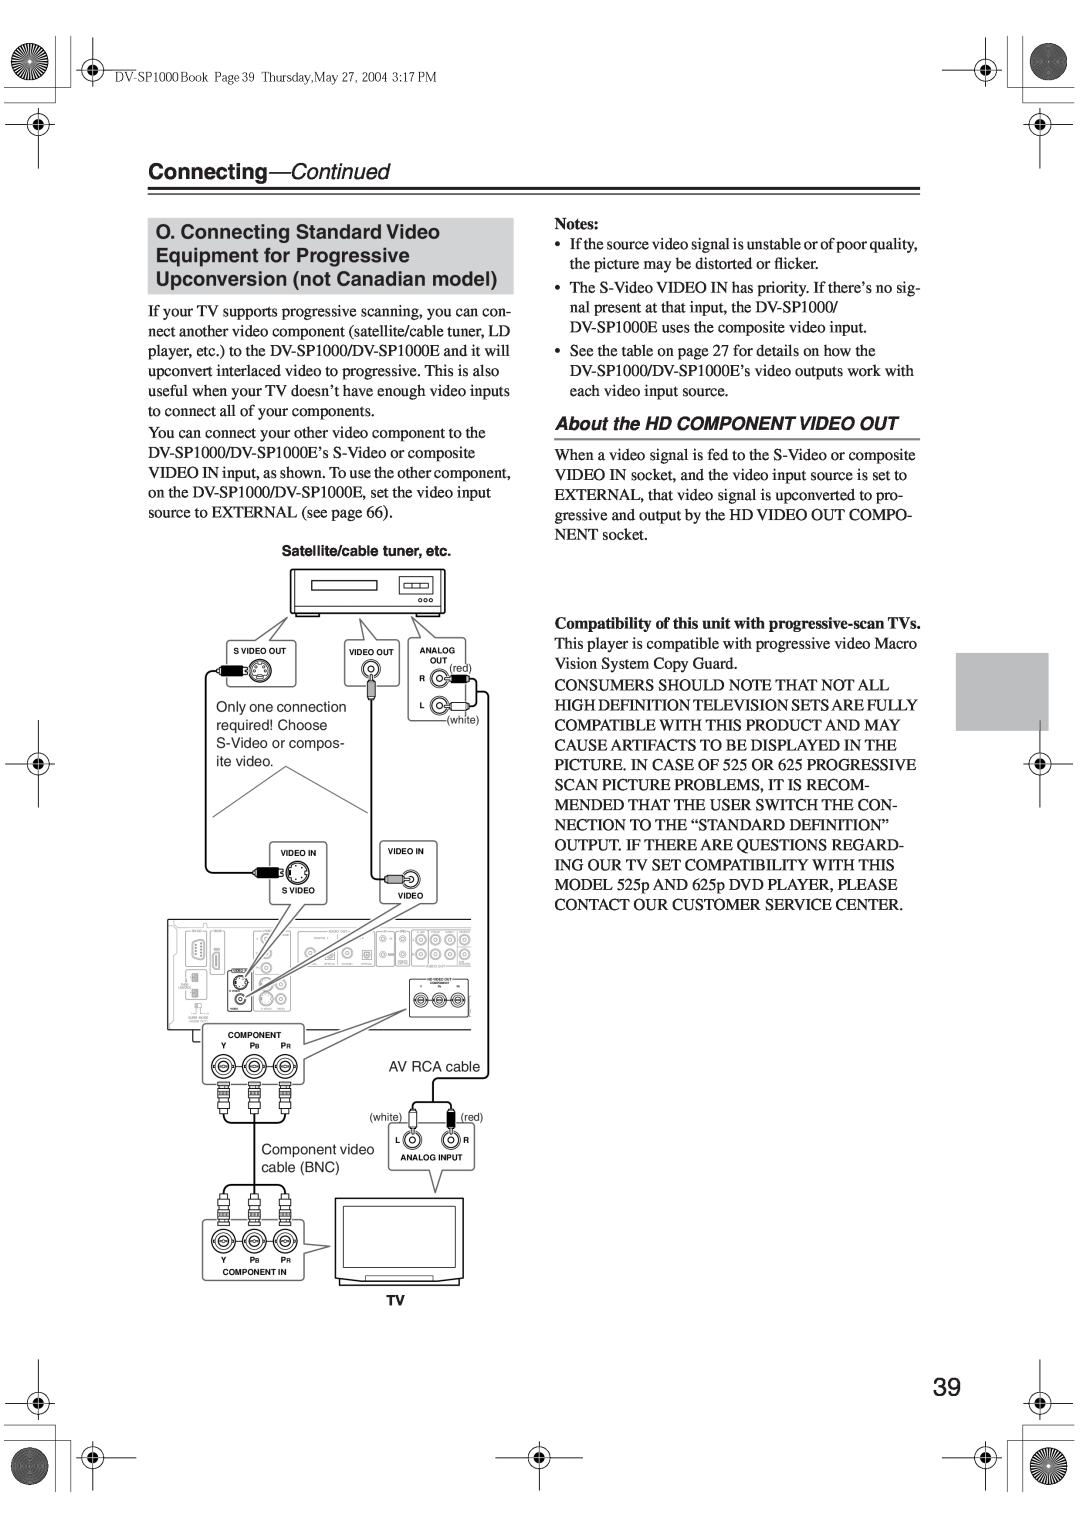 Onkyo DV-SP1000E instruction manual About the HD COMPONENT VIDEO OUT, Connecting—Continued, Notes 